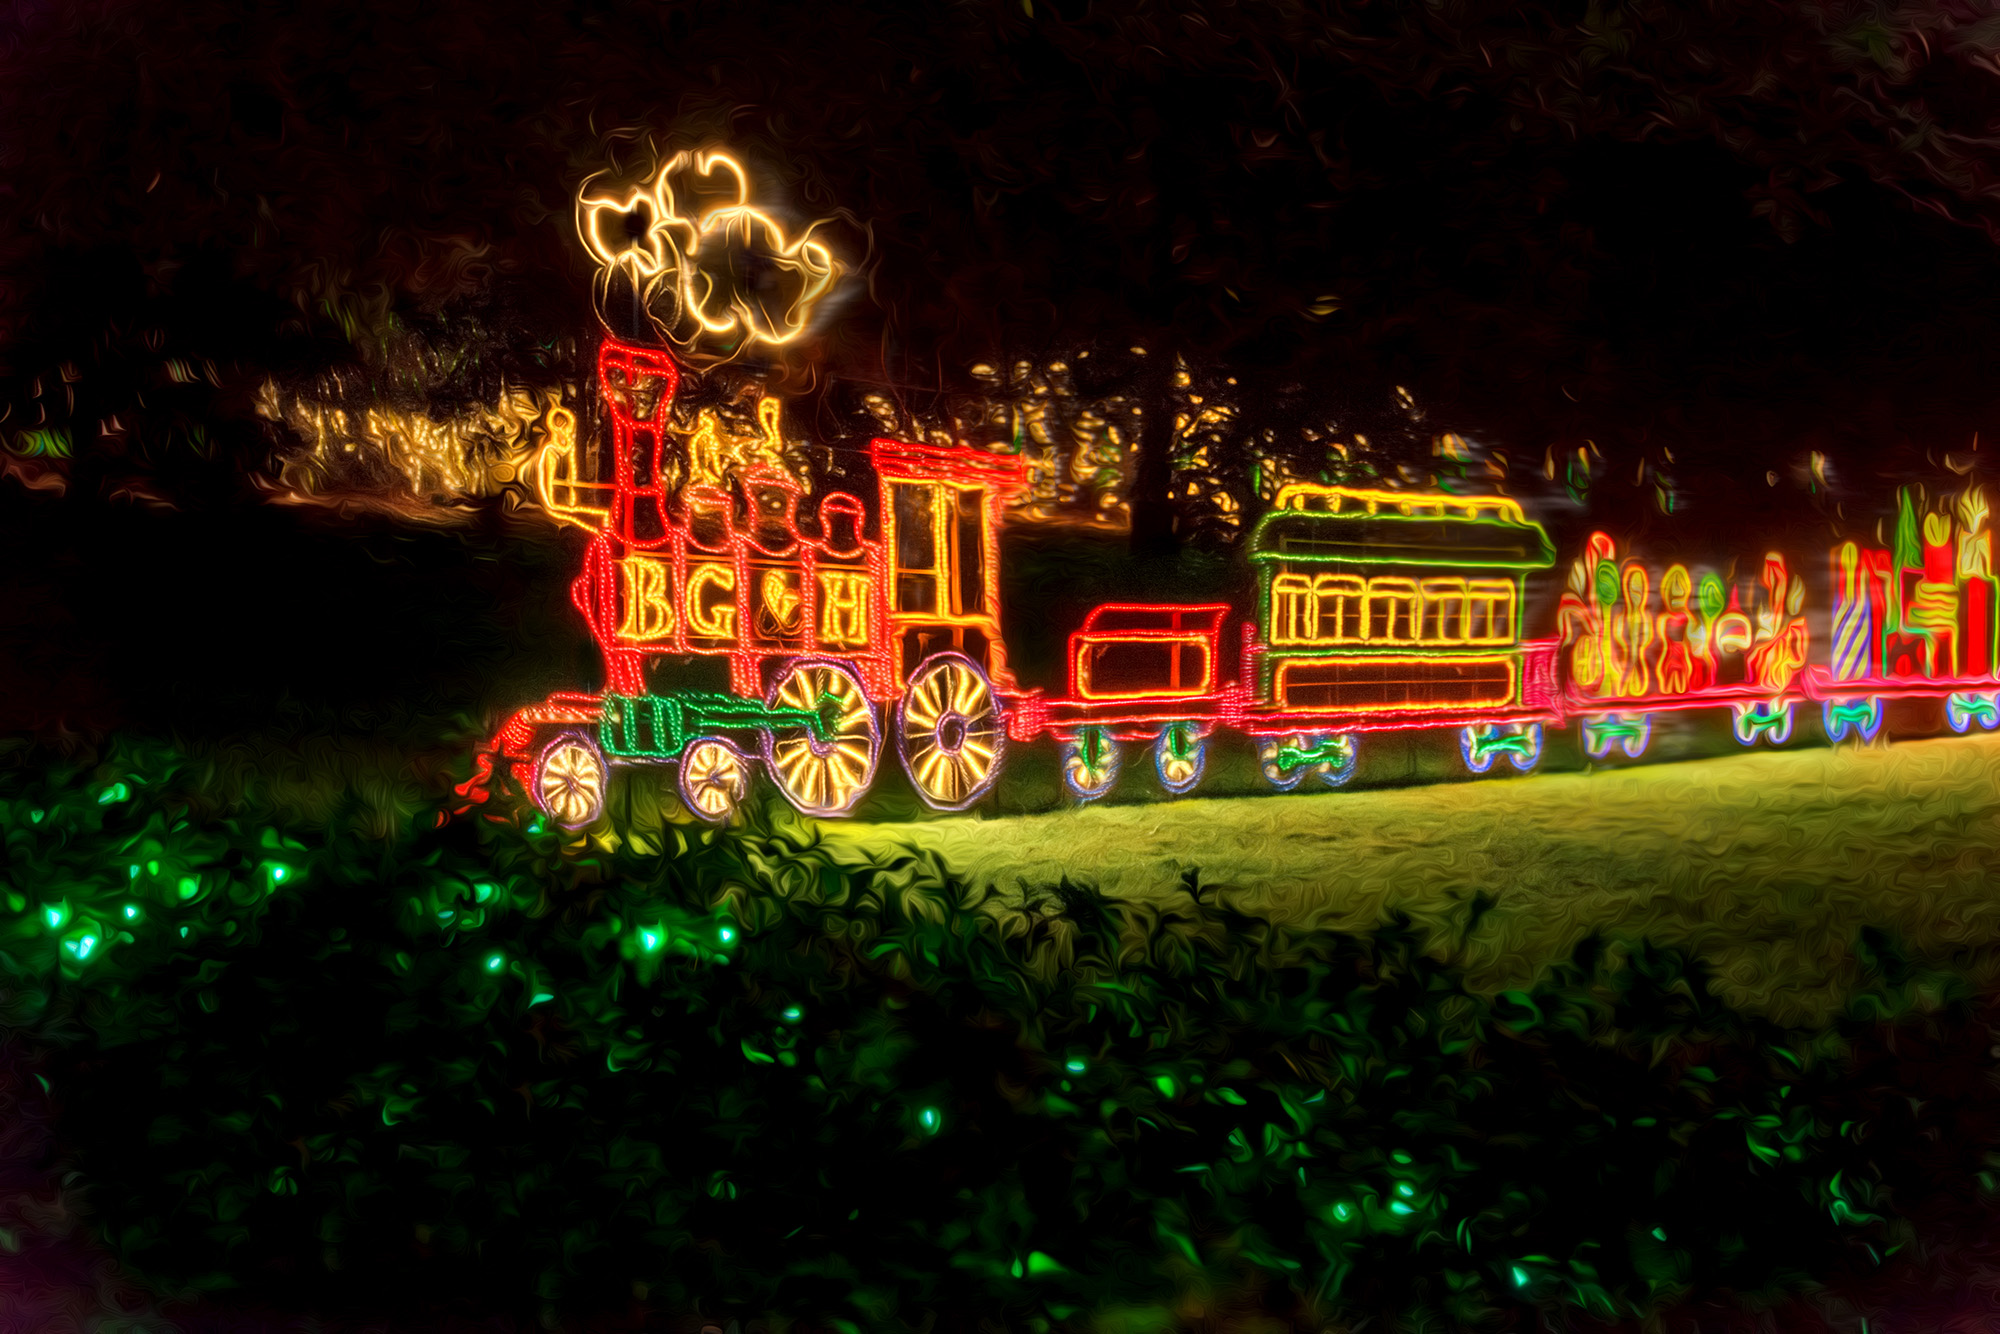 Bellingrath Gardens and Home celebrates 25 Years of Magic Christmas in